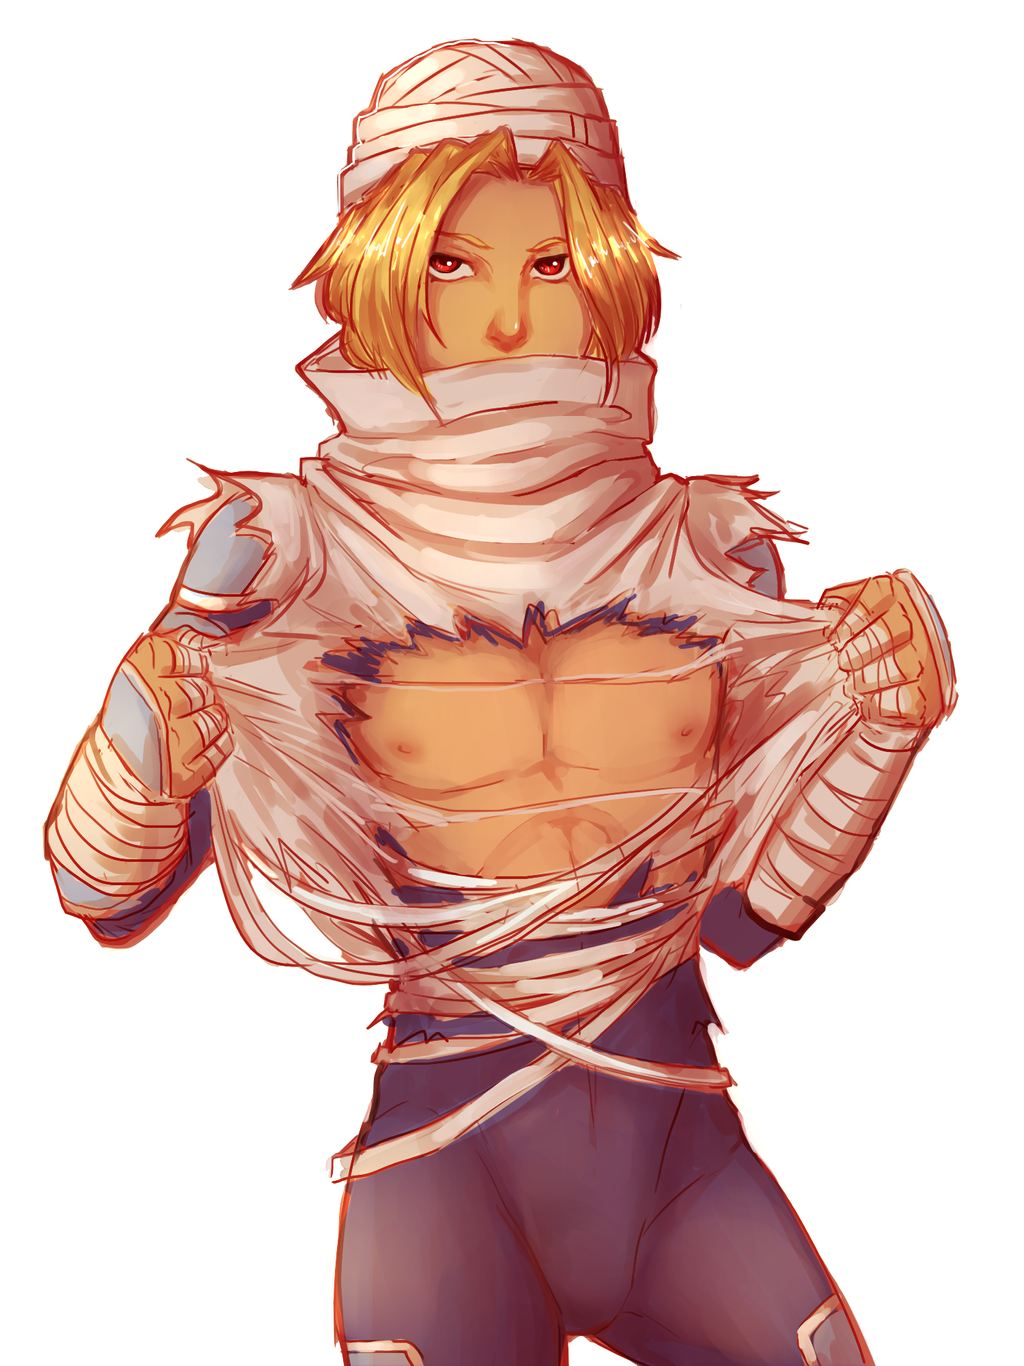 sheik____redraw_by_raven_igma-d77kkwd.png